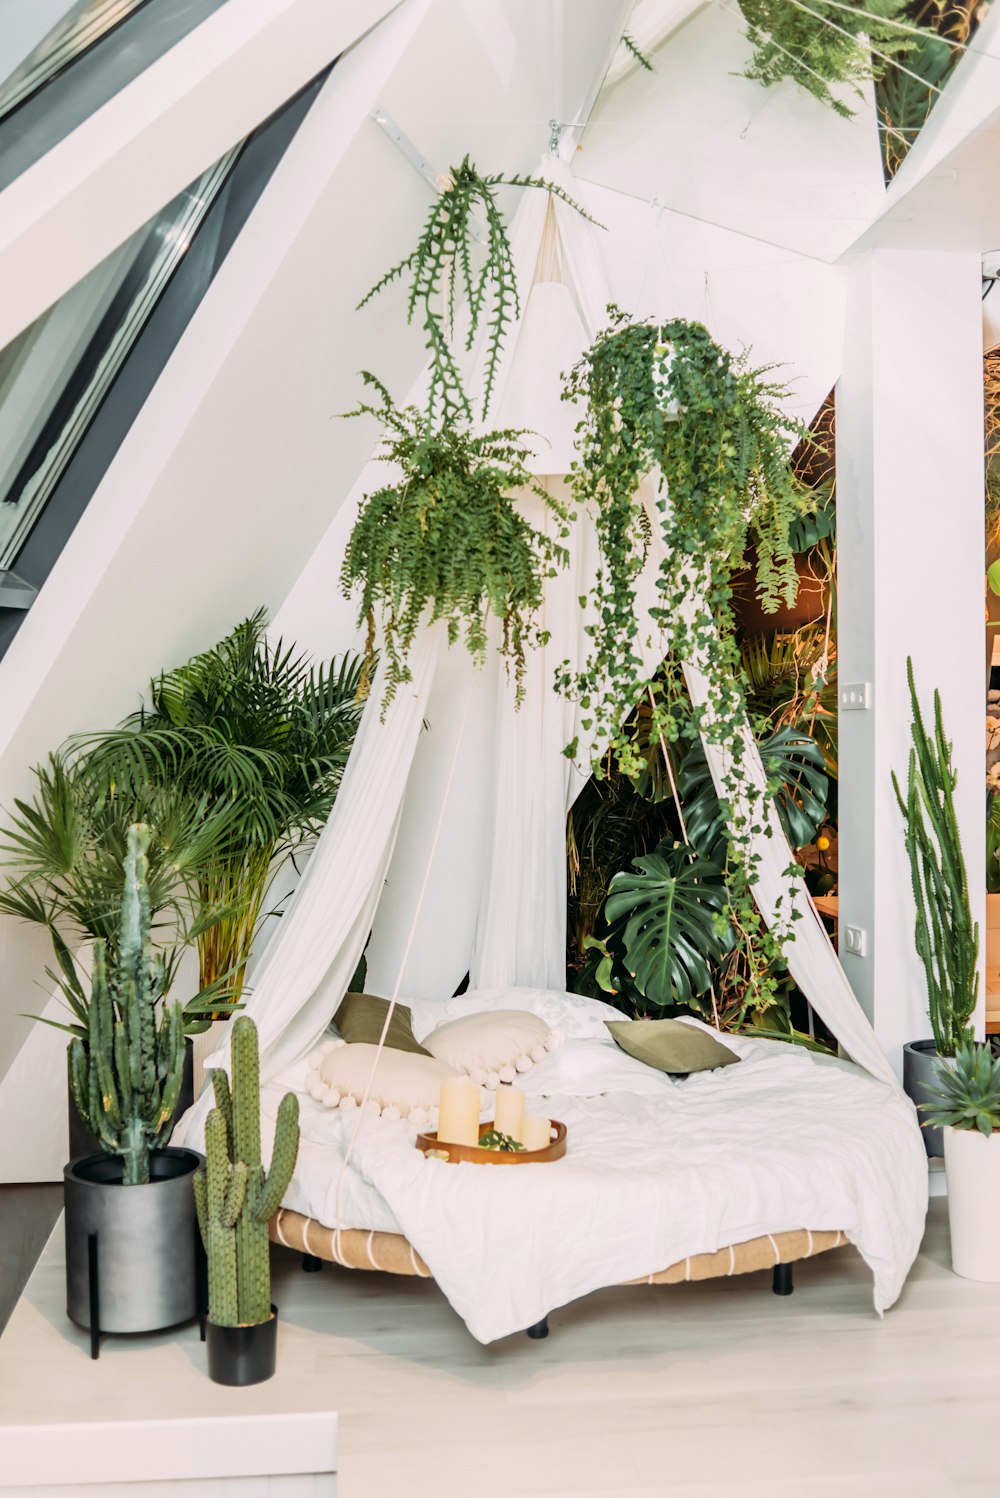 A bed with a canopy and plants in a room photo – Free Furniture Image on  Unsplash